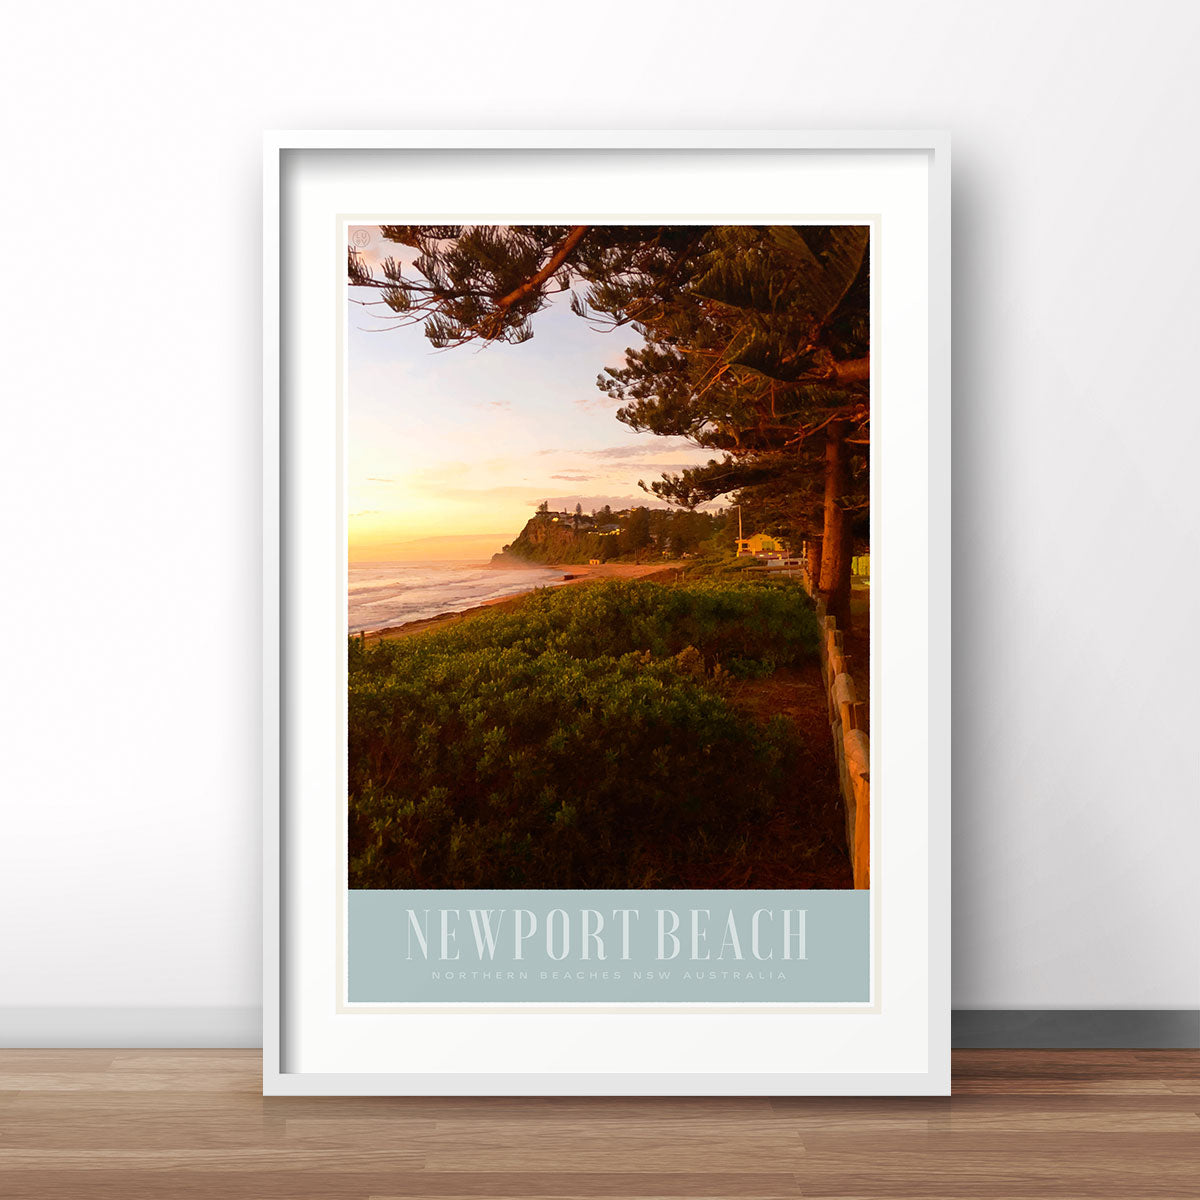 Newport beach retro vintage poster print from places we luv